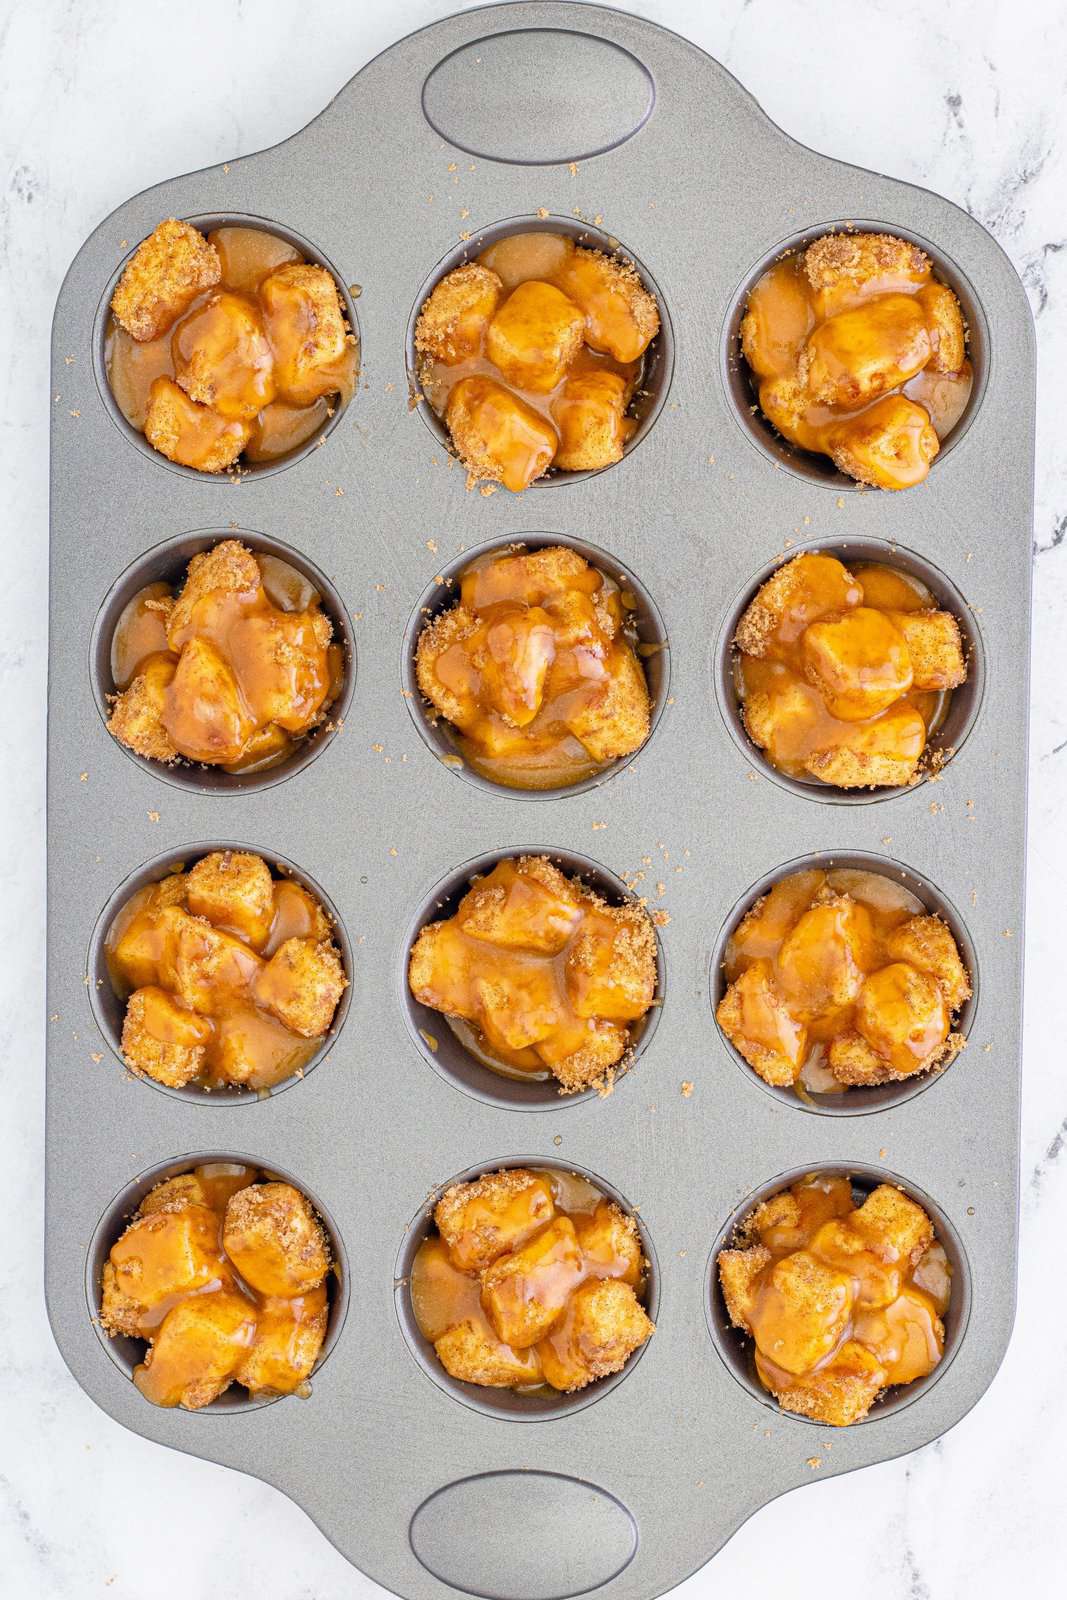 Sauce drizzled over cinnamon roll pieces in muffin tin.